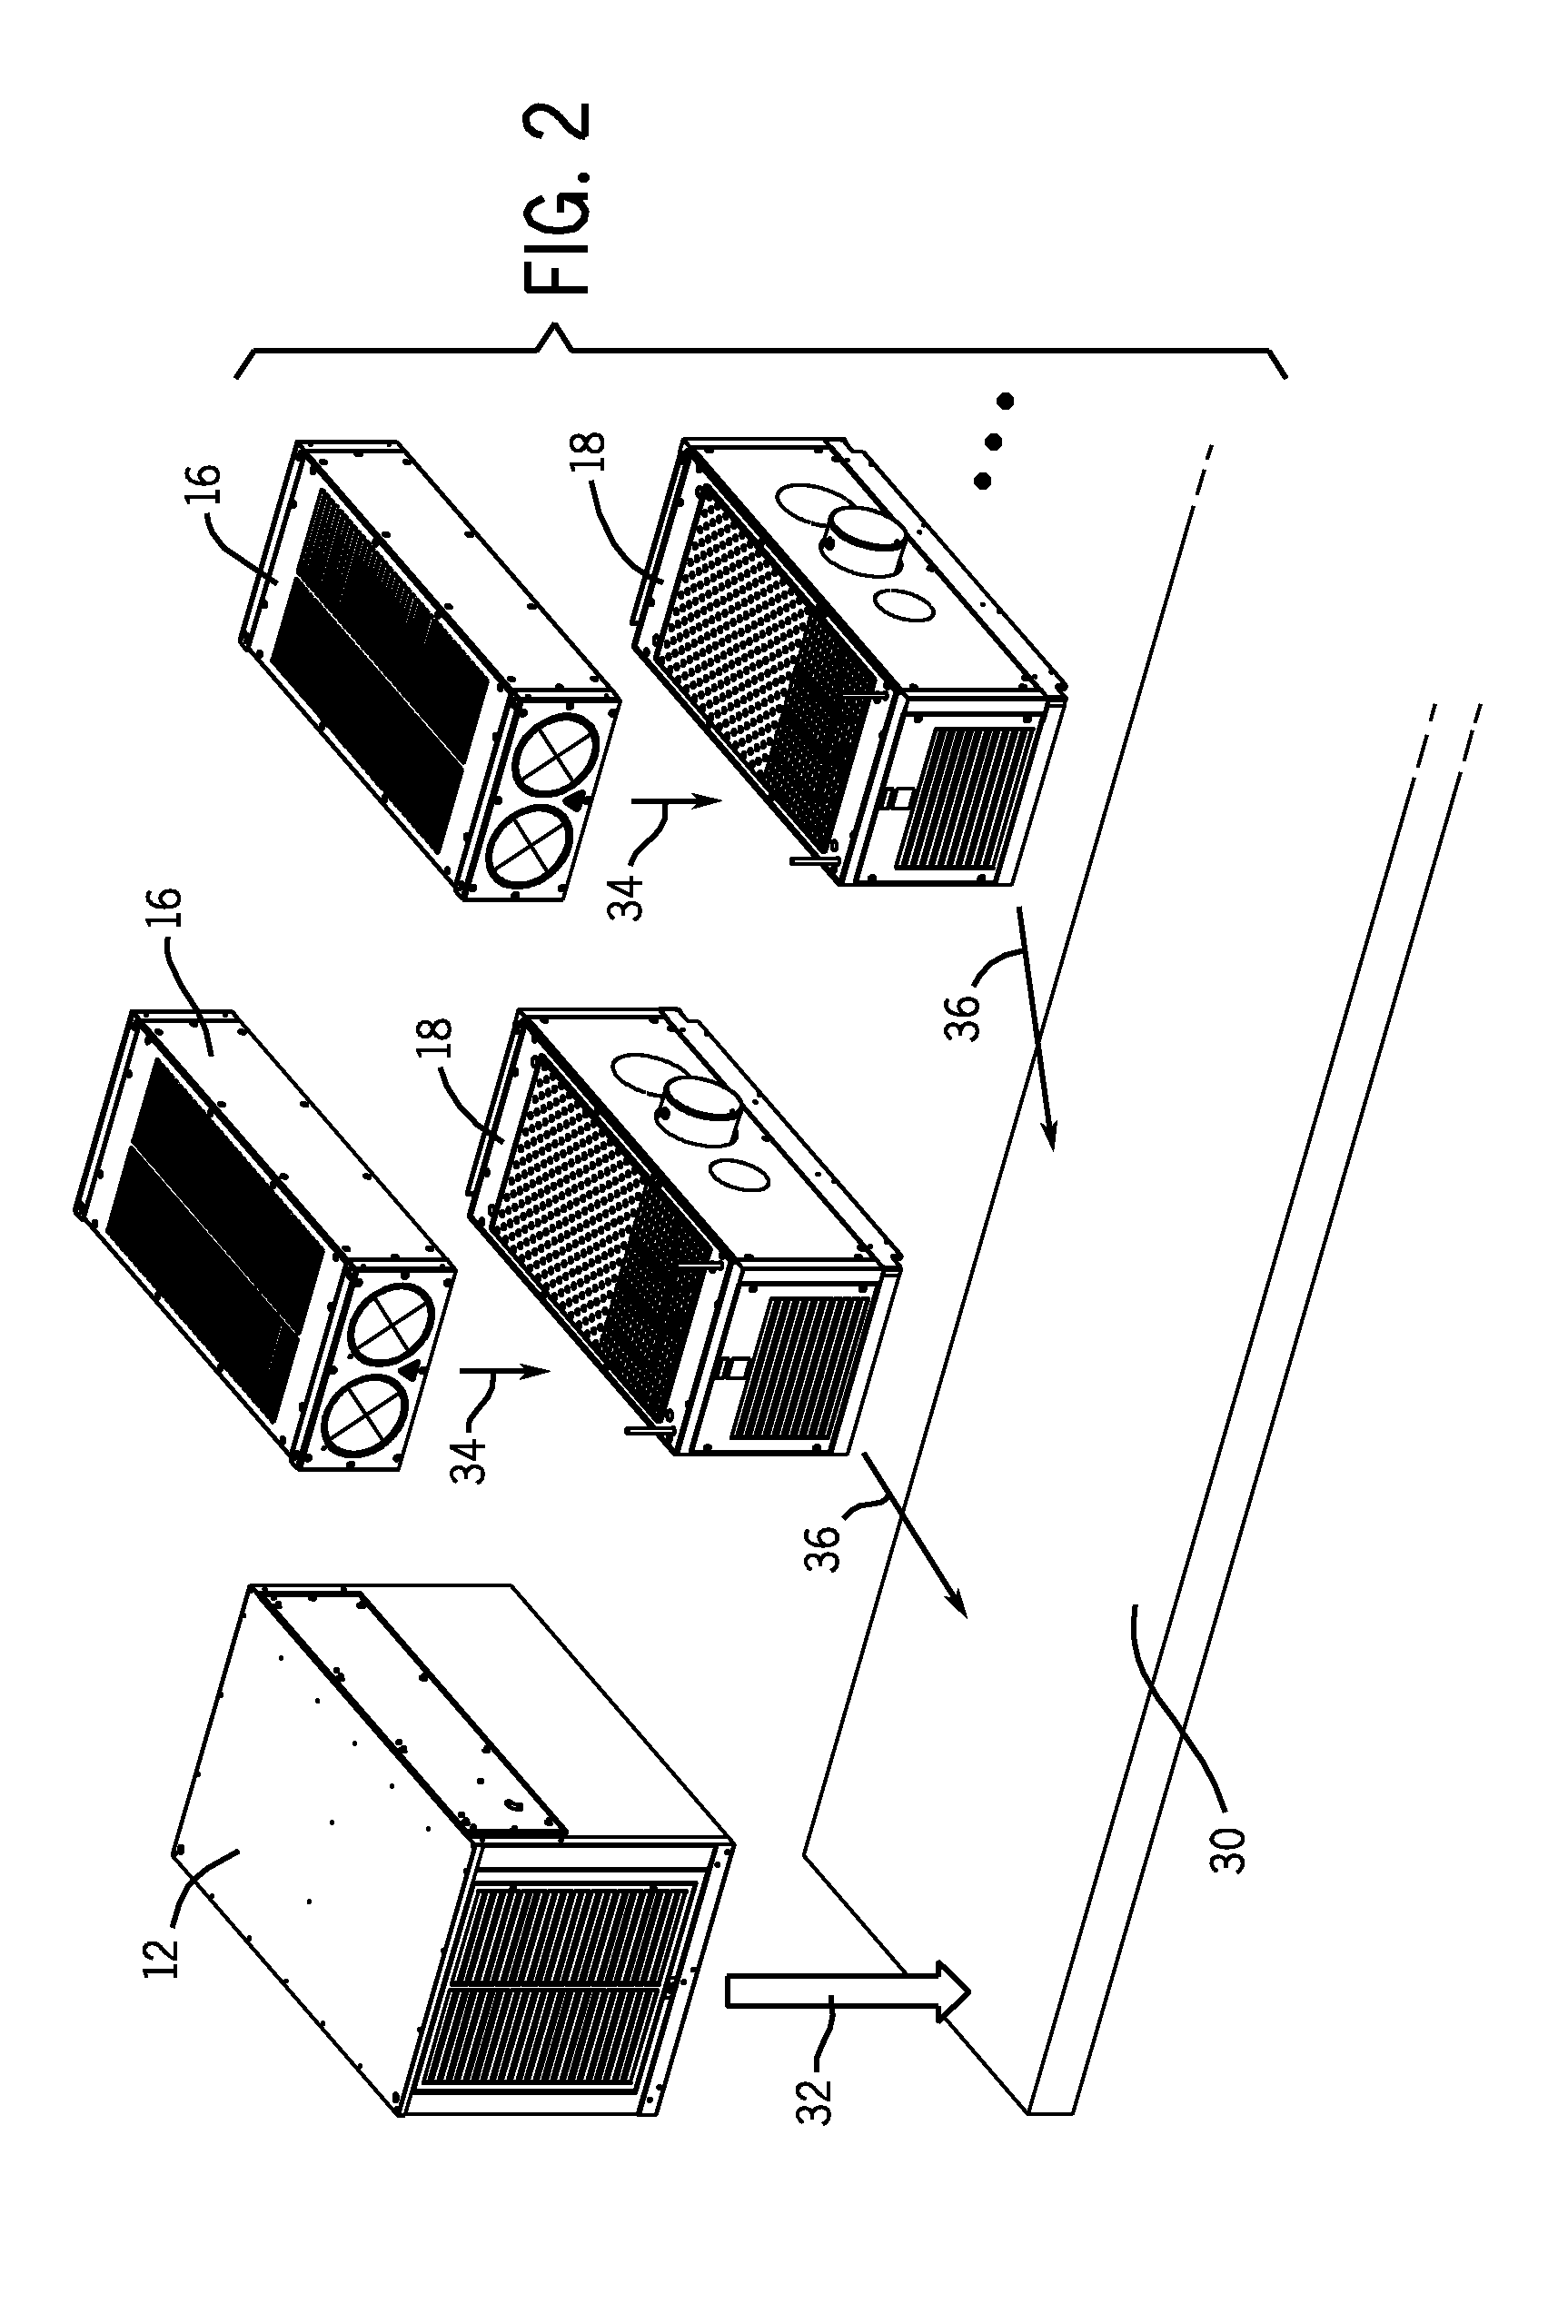 Control systems and methods for modular heating, ventilating, air conditioning, and refrigeration systems